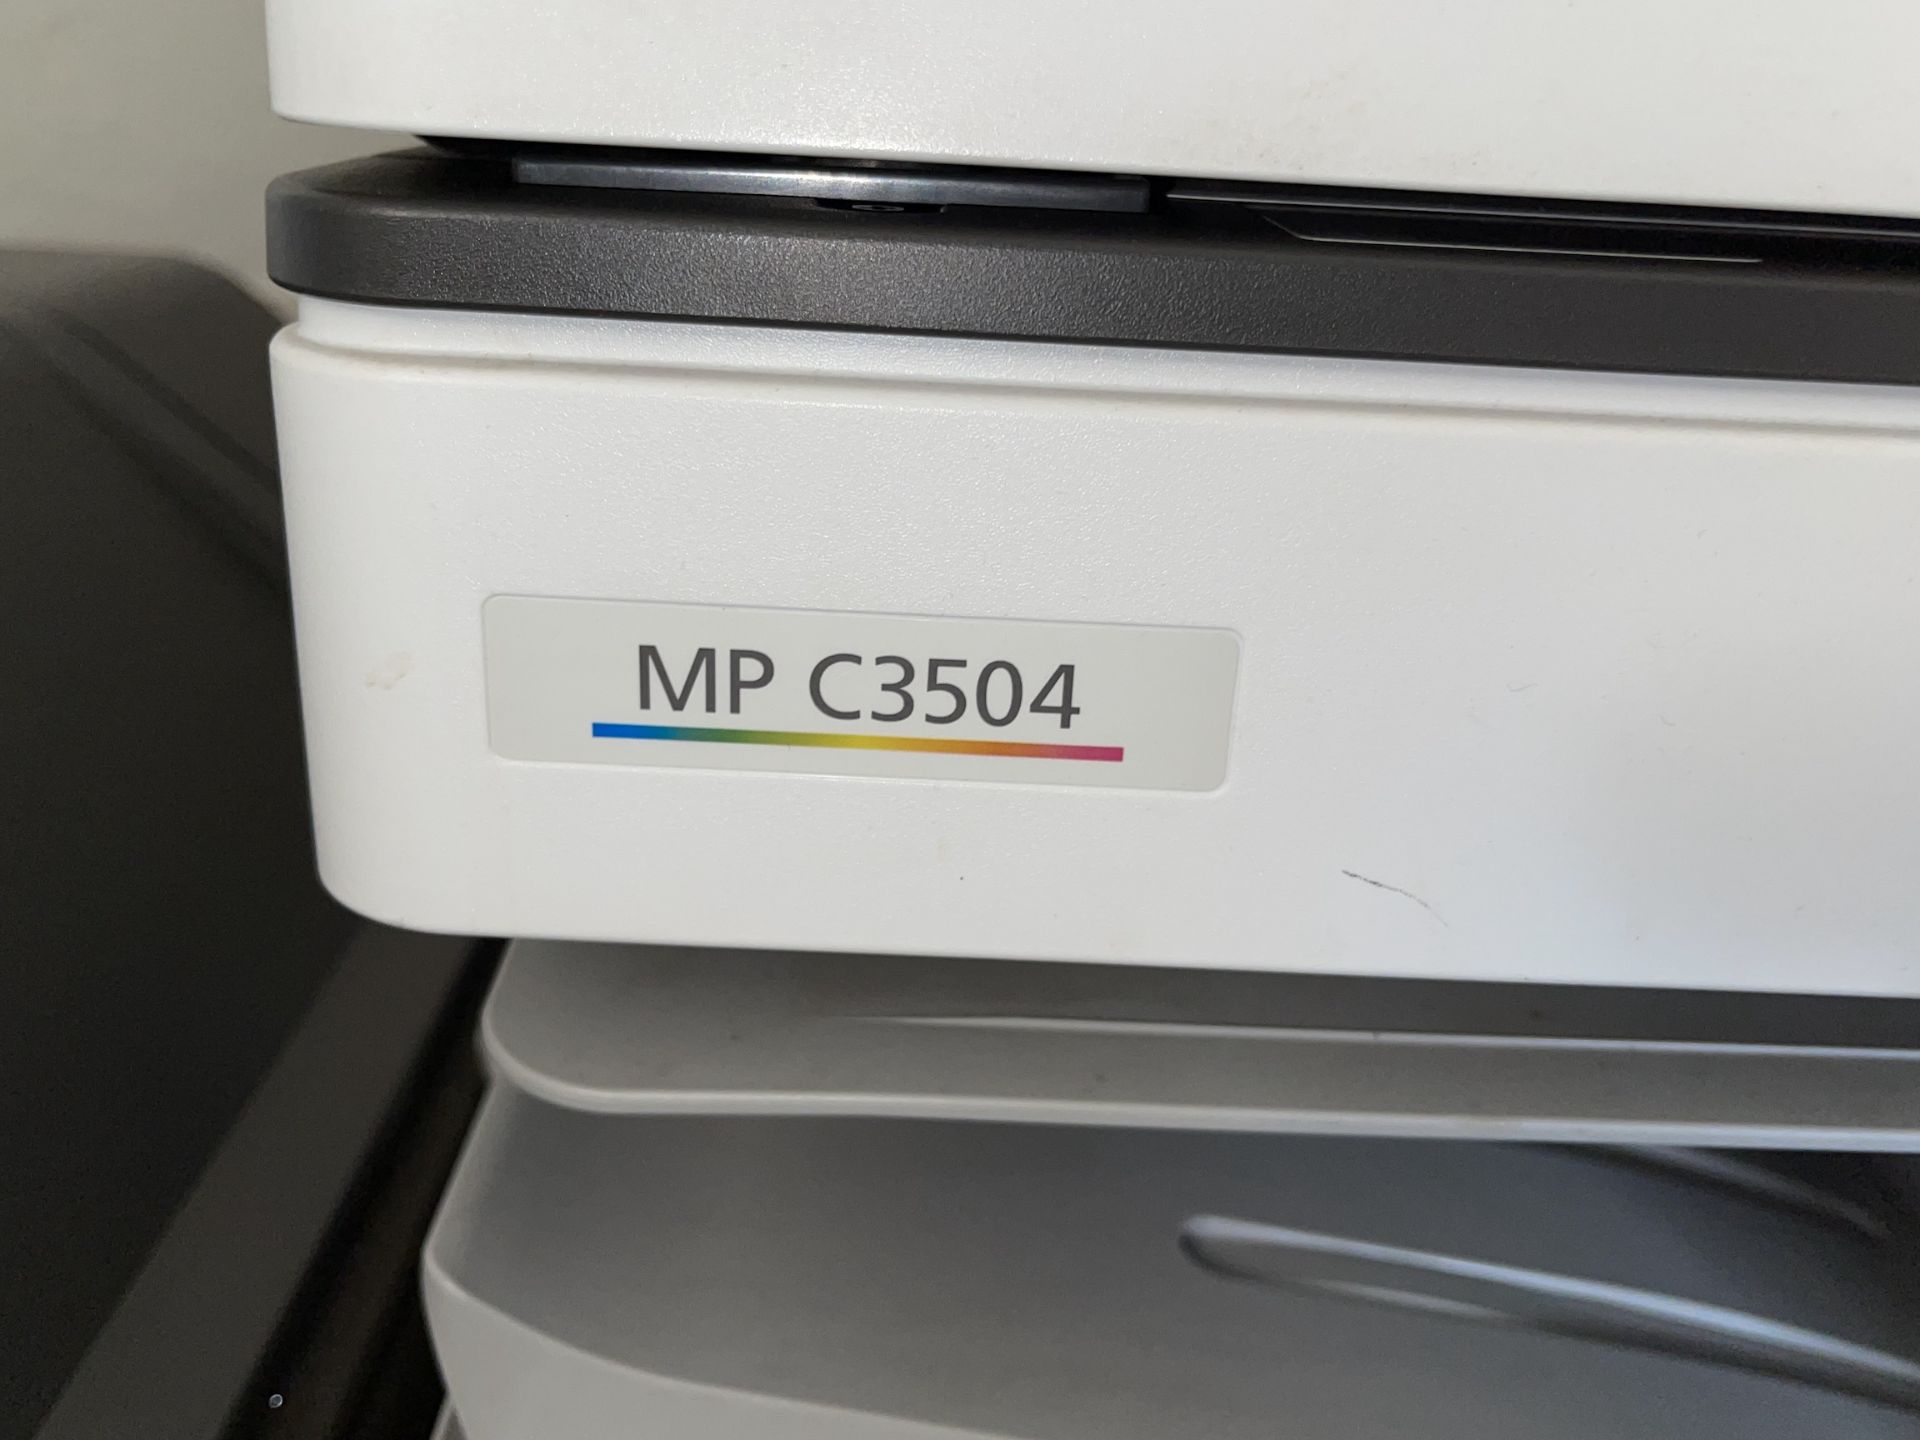 Ricoh MP C3504 3 in one Printer (619U) - Upland - Image 4 of 10